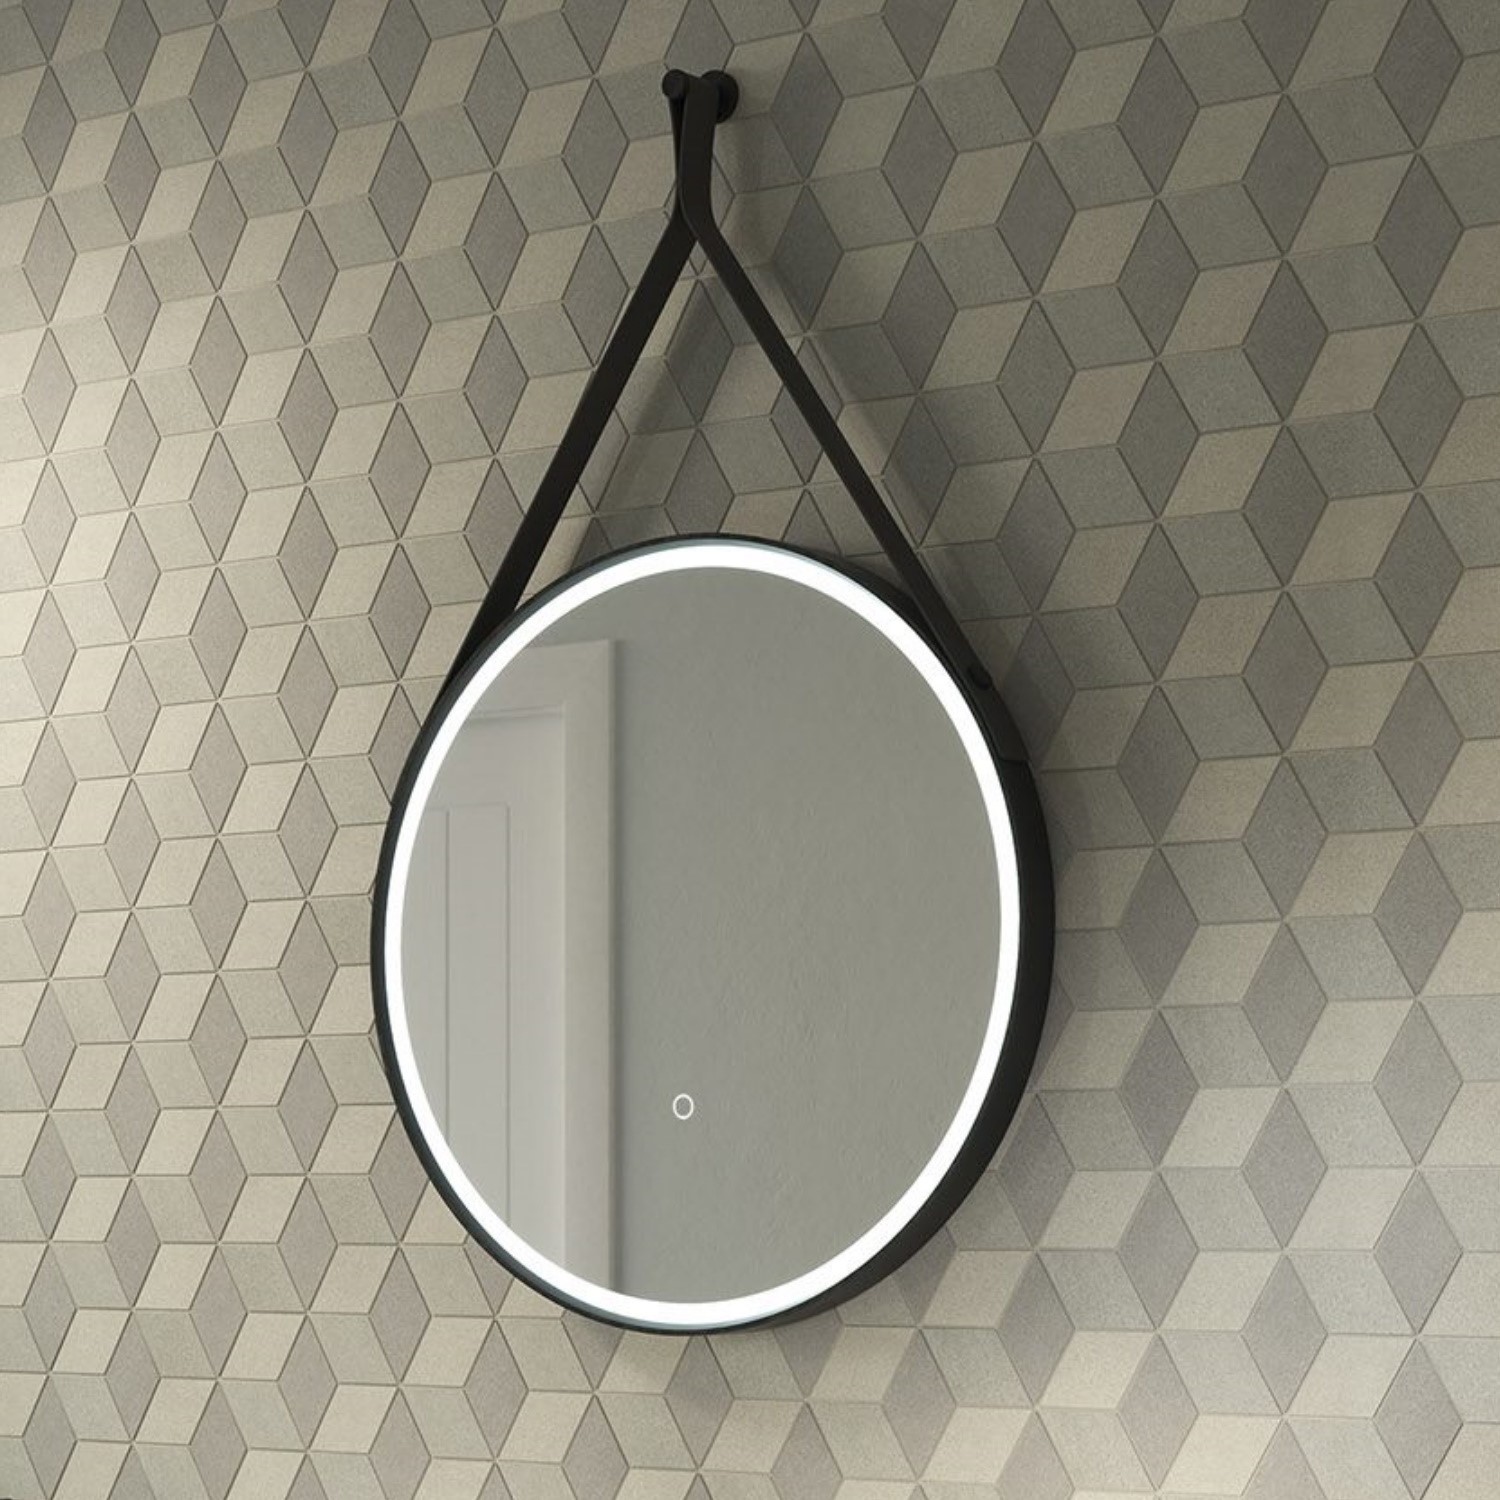 Round Led Bathroom Mirror With Leather, Round Mirror With Leather Strap The Range